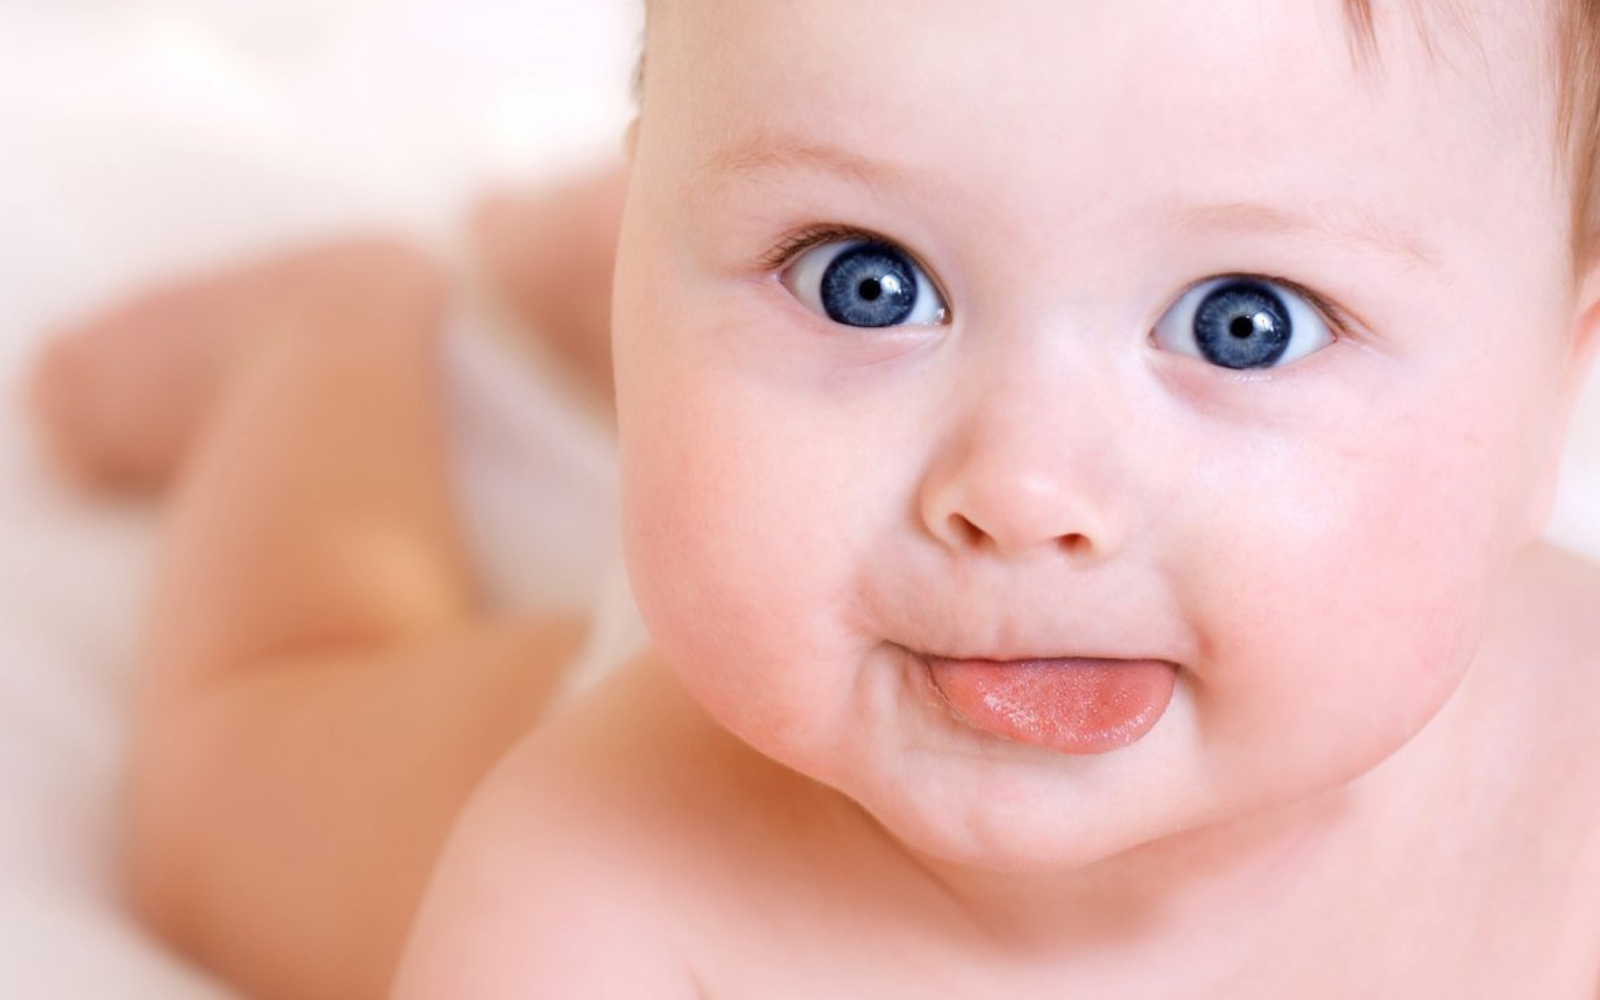 Tongue tied: How a small piece of tissue can affect your baby's feeding and sleep